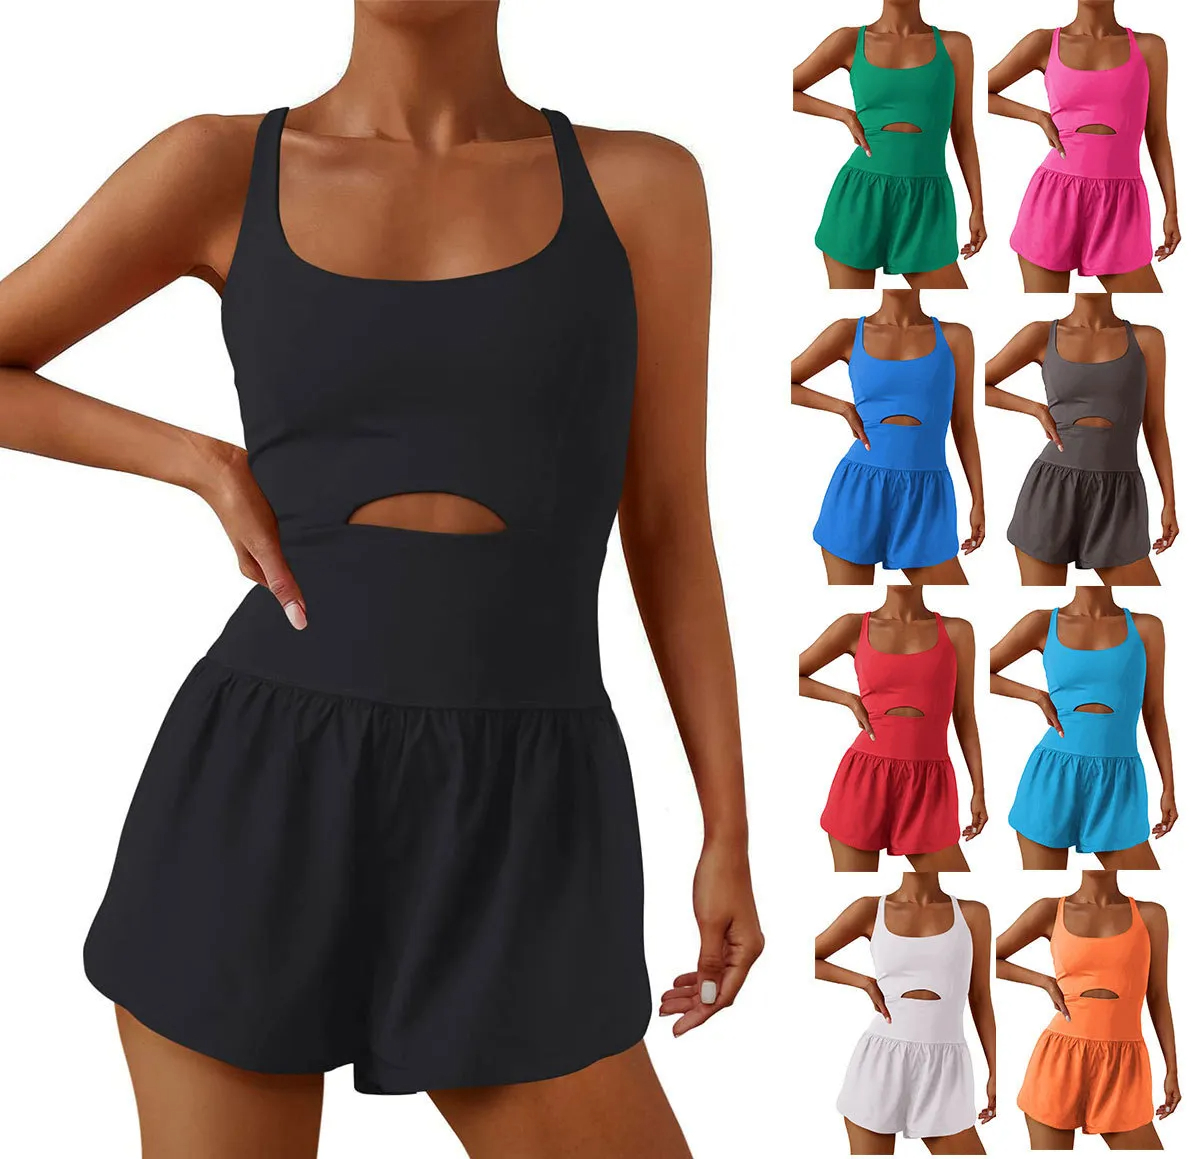 CRISSCROSS BACKLESS CUTOUT TANK ATHLETIC ROMPER (BUY 2 FREE SHIPPING)